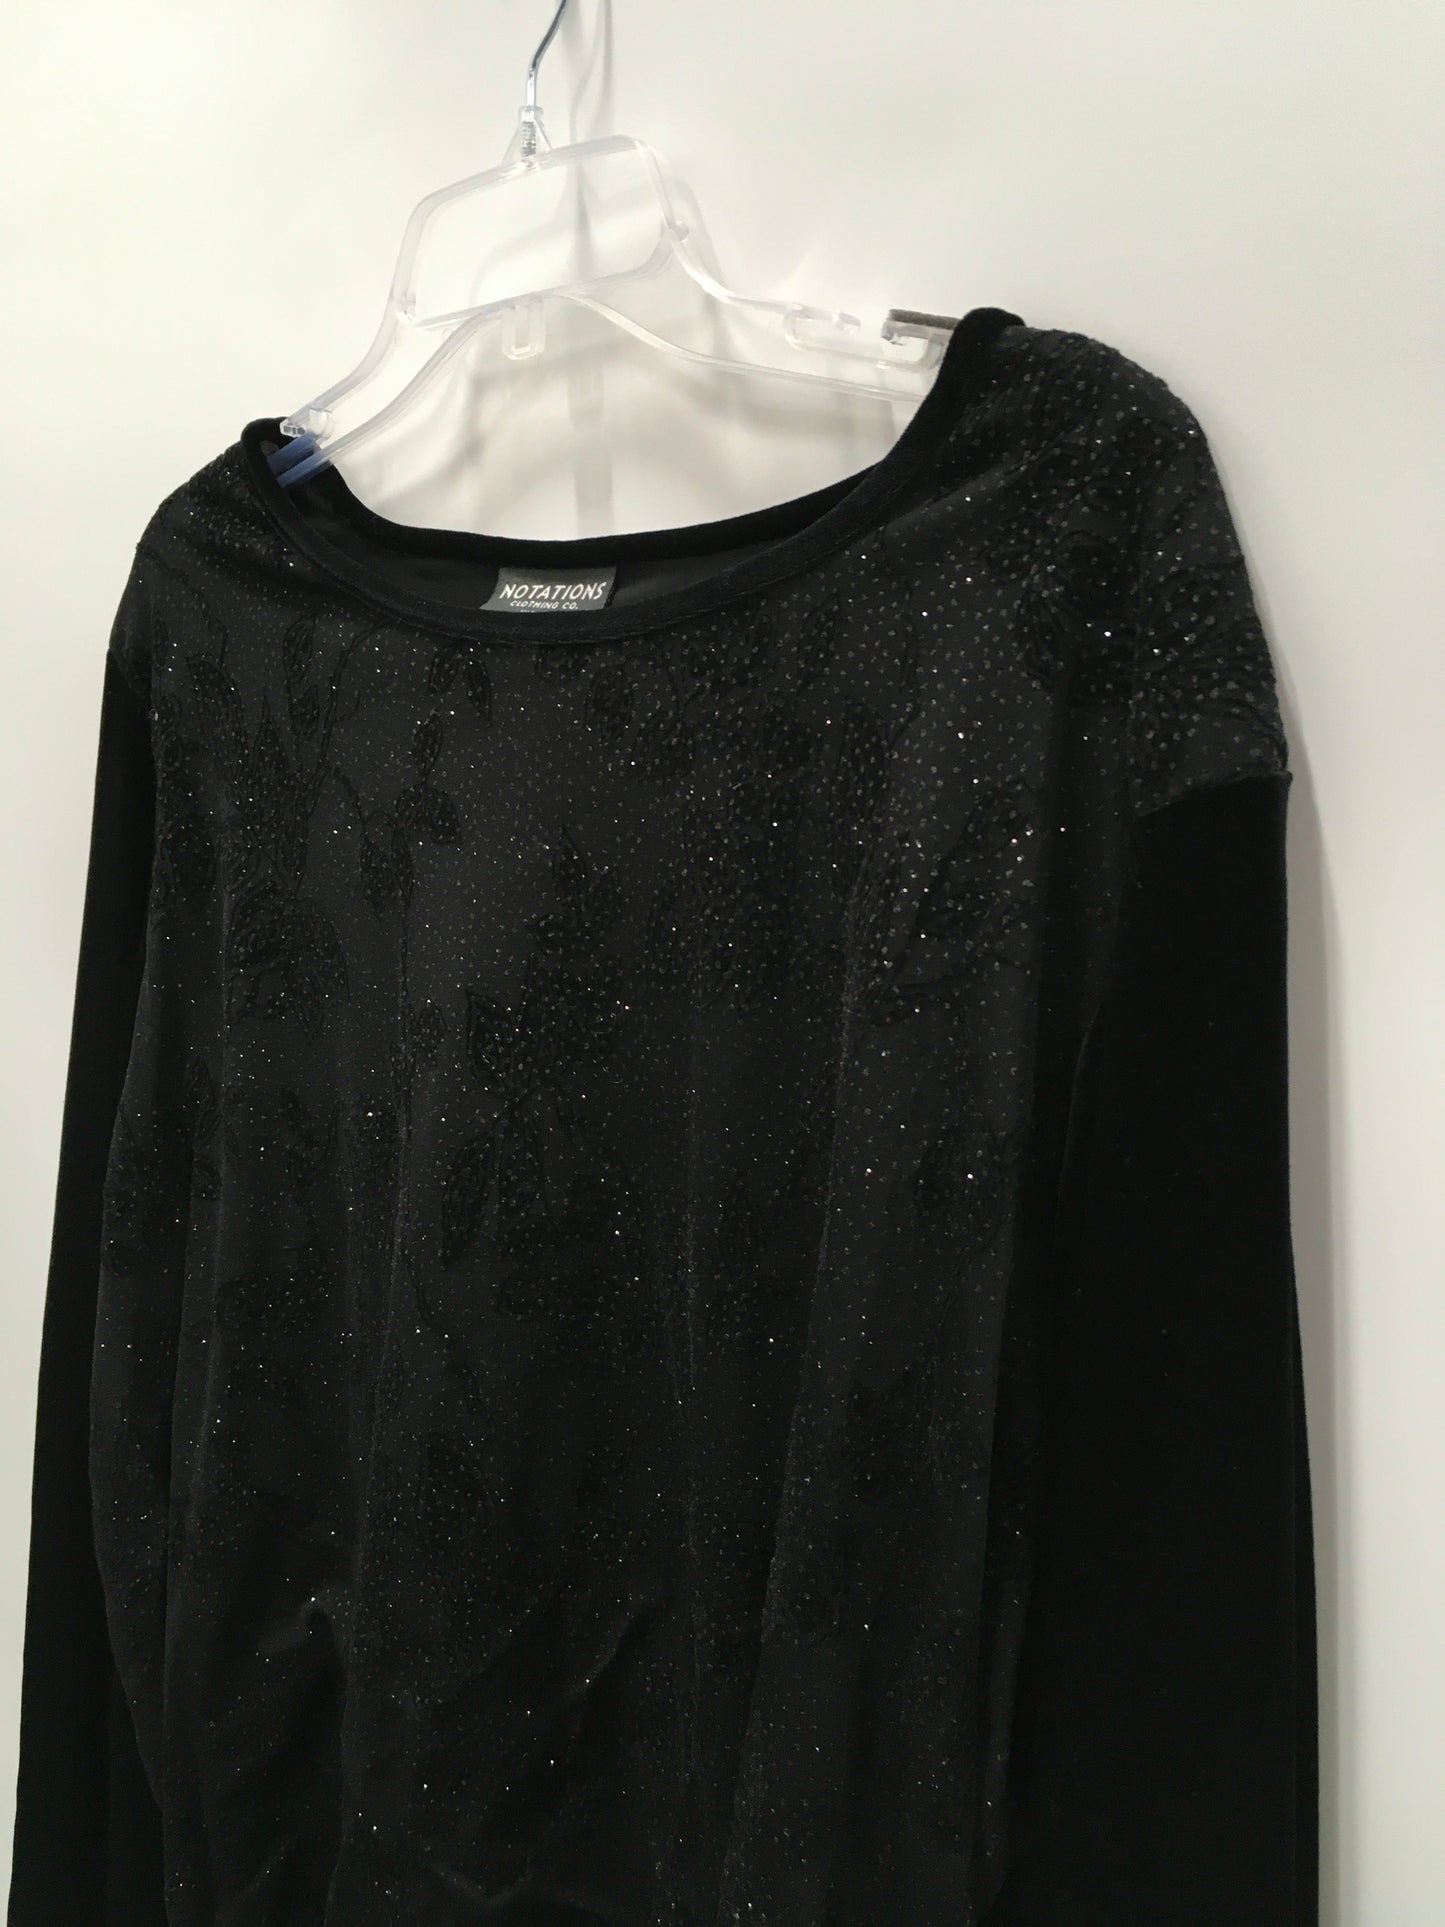 Black Top Long Sleeve Notations, Size 2x